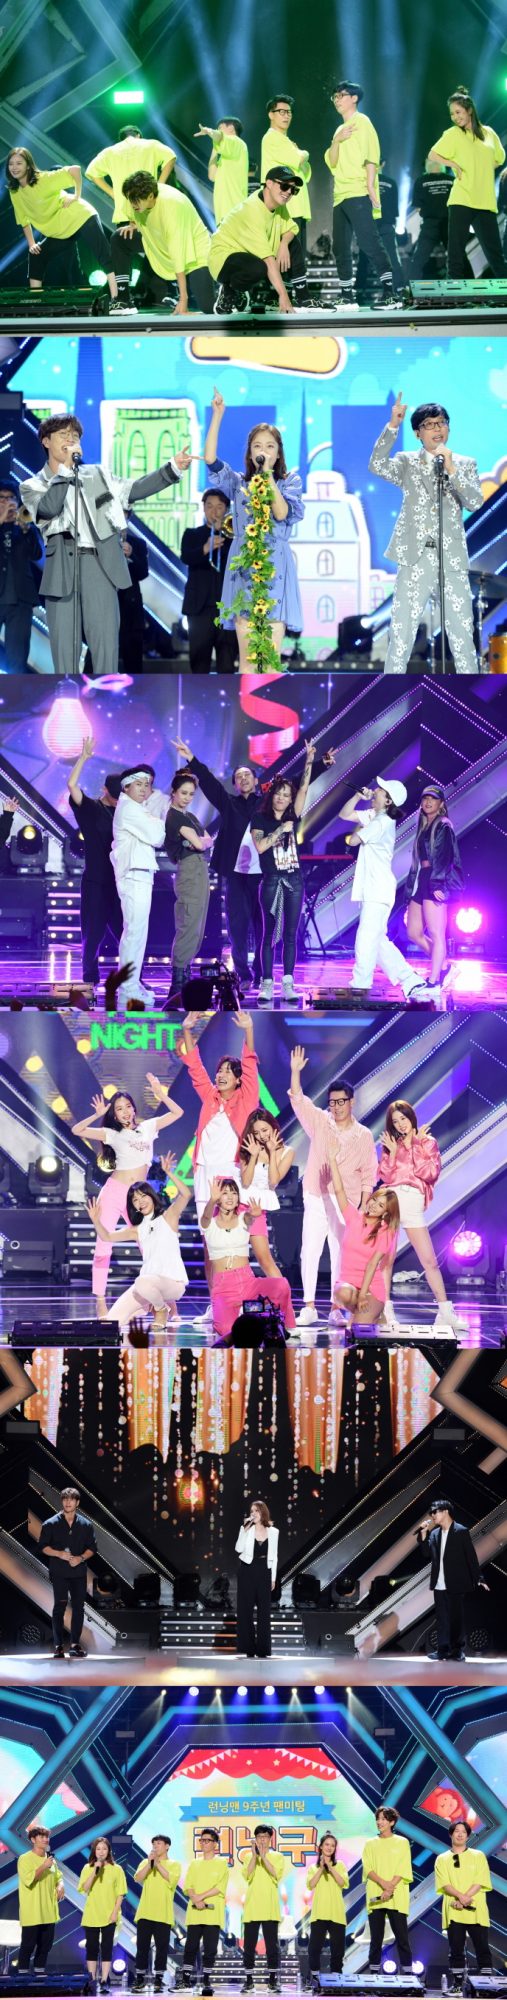 SBS will broadcast SEK once more in October to perform the Nine-year anniversary fan meeting T-Shirt performance of Running Man.T-Shirt fan meeting is a fan meeting that was first presented to domestic fans by the production team and members for three months in response to Running Man Nine-year anniversary.The members individual stage, as well as group dance, Running Man theme song, and joint stage with top artists were released.About 2,400 fans participated in the T-Shirt fan meeting held on the 26th of last month, and they breathed hot with the members.Song Ji-hyo, Yang Se-chan and Nuksal & Cod Kunst formed Hyochan Park to sing Bongjur High with limited express guest Yoon Mi-rae, and Ji Suk-jin and Lee Kwang-soo and A Pink, named Pinko Light, raised the atmosphere with an addictive dance song Party.The Jeon So-min and Yoo Jae-Suk, which are a combination of Yoo Jae-Suk and Jeon So-min, set the record for the best decibel with Now Come out Confessions, which contains the experiences of Jeon So-min.The F-killer, which is a combination of Balader spider, Kim Jong-kook, and Haha, set up a ballad stage with raise your voice.Immediately after the broadcast, their stage drew a hot response: ratings rose for three consecutive weeks during the T-Shirt special.The video of Aladdin OST Speechless, which Kim Jong-kook sang on the solo stage, exceeded 750,000 views only on one portal.Joint stage footage with The Artists also exceeded 100,000 views, higher than the average.The T-Shirt sound source can be found on major sound source sites, and the proceeds will be donated in full.